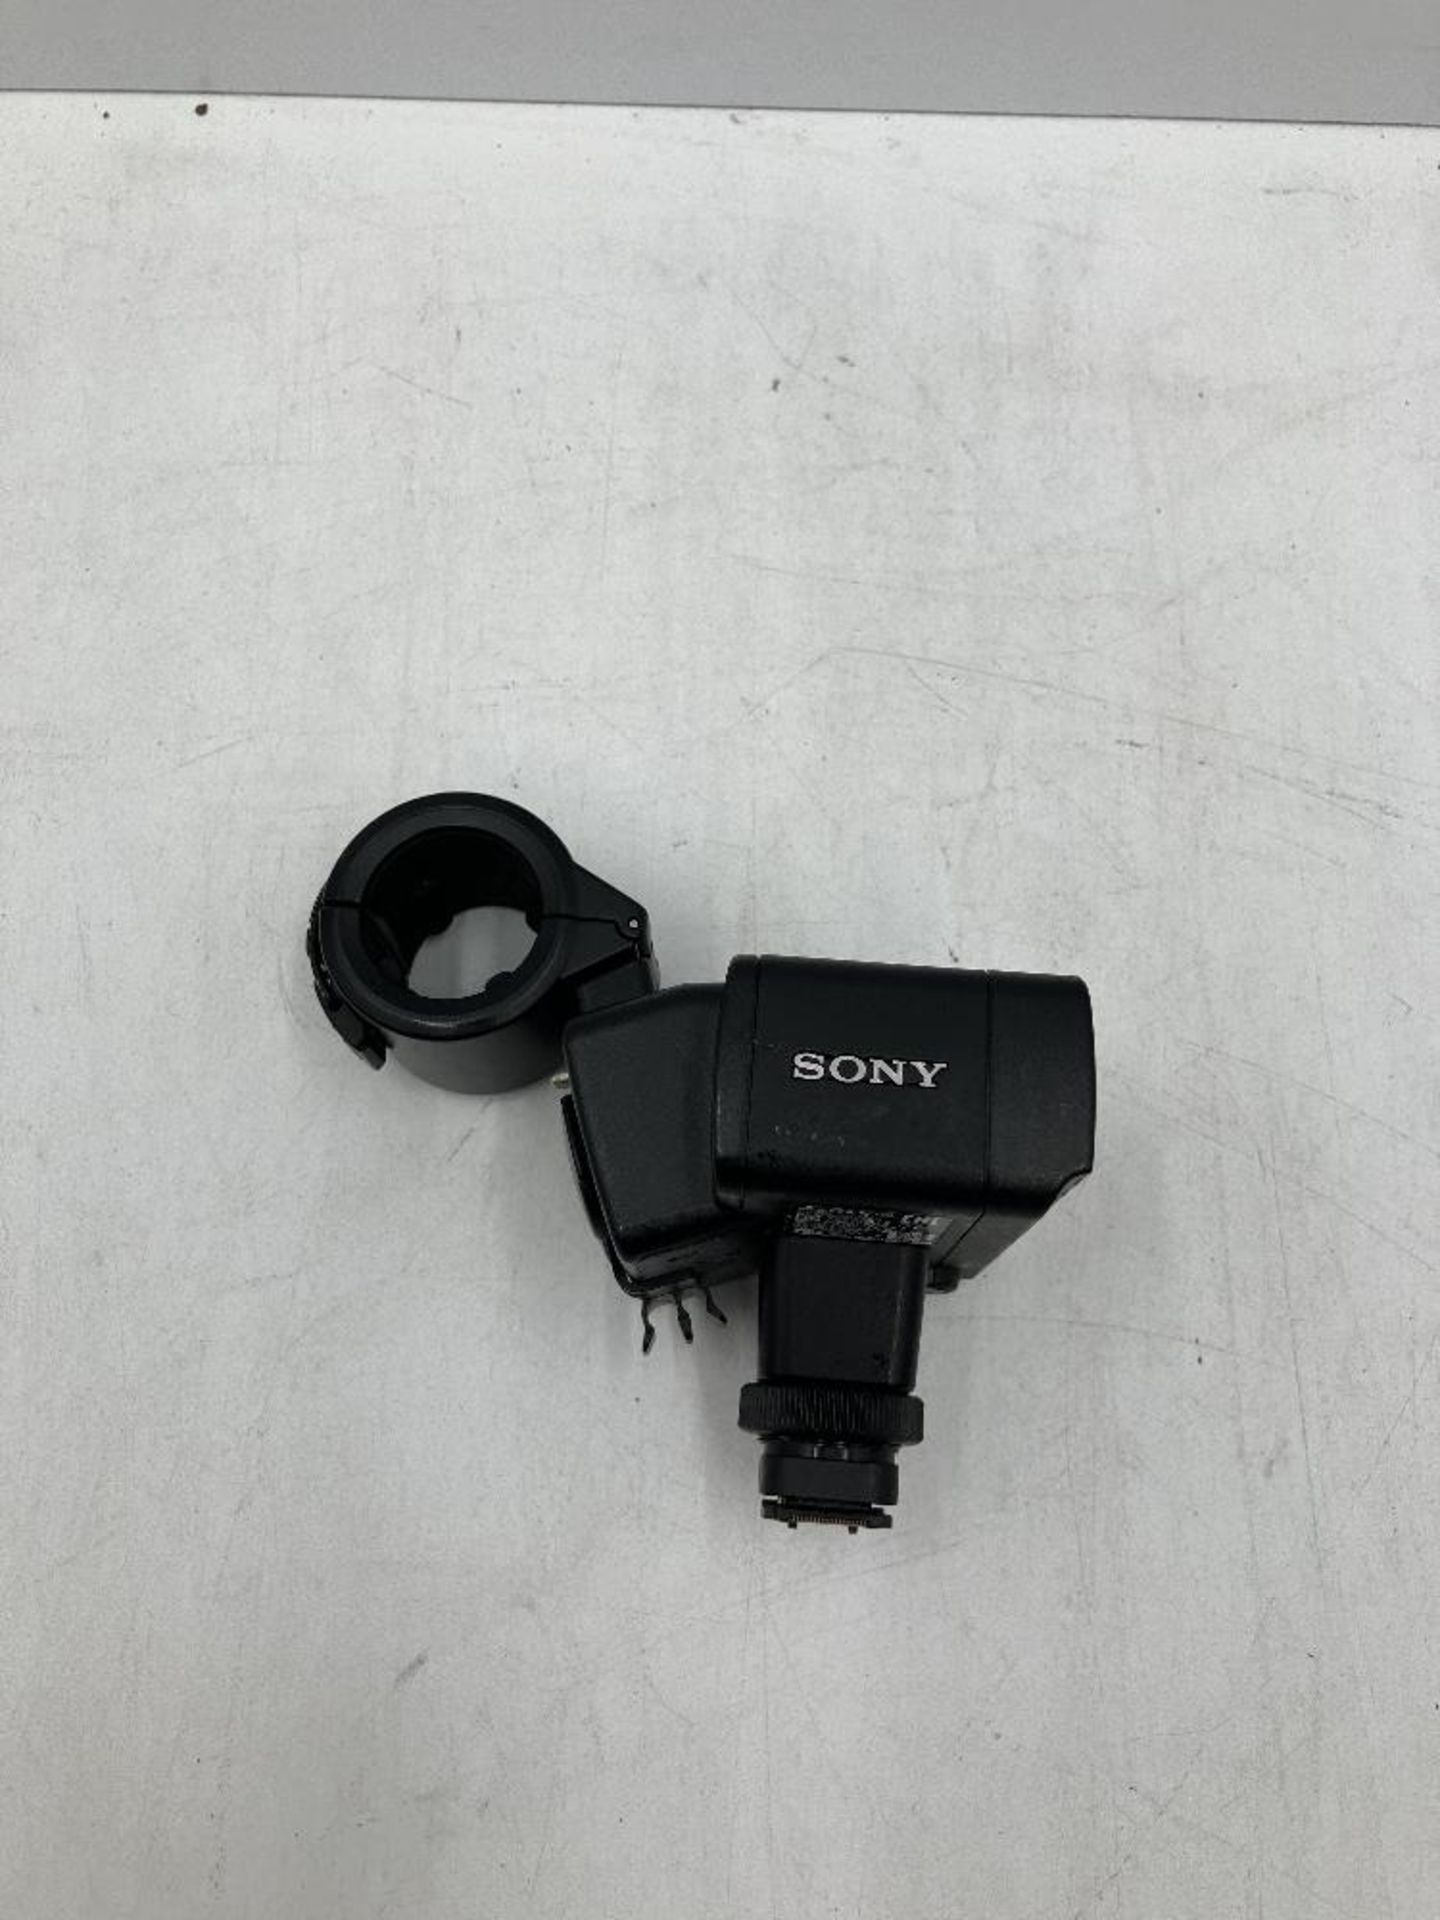 Sony XLR-A2M Audio Adaptor with Sony Microphone - Image 3 of 7